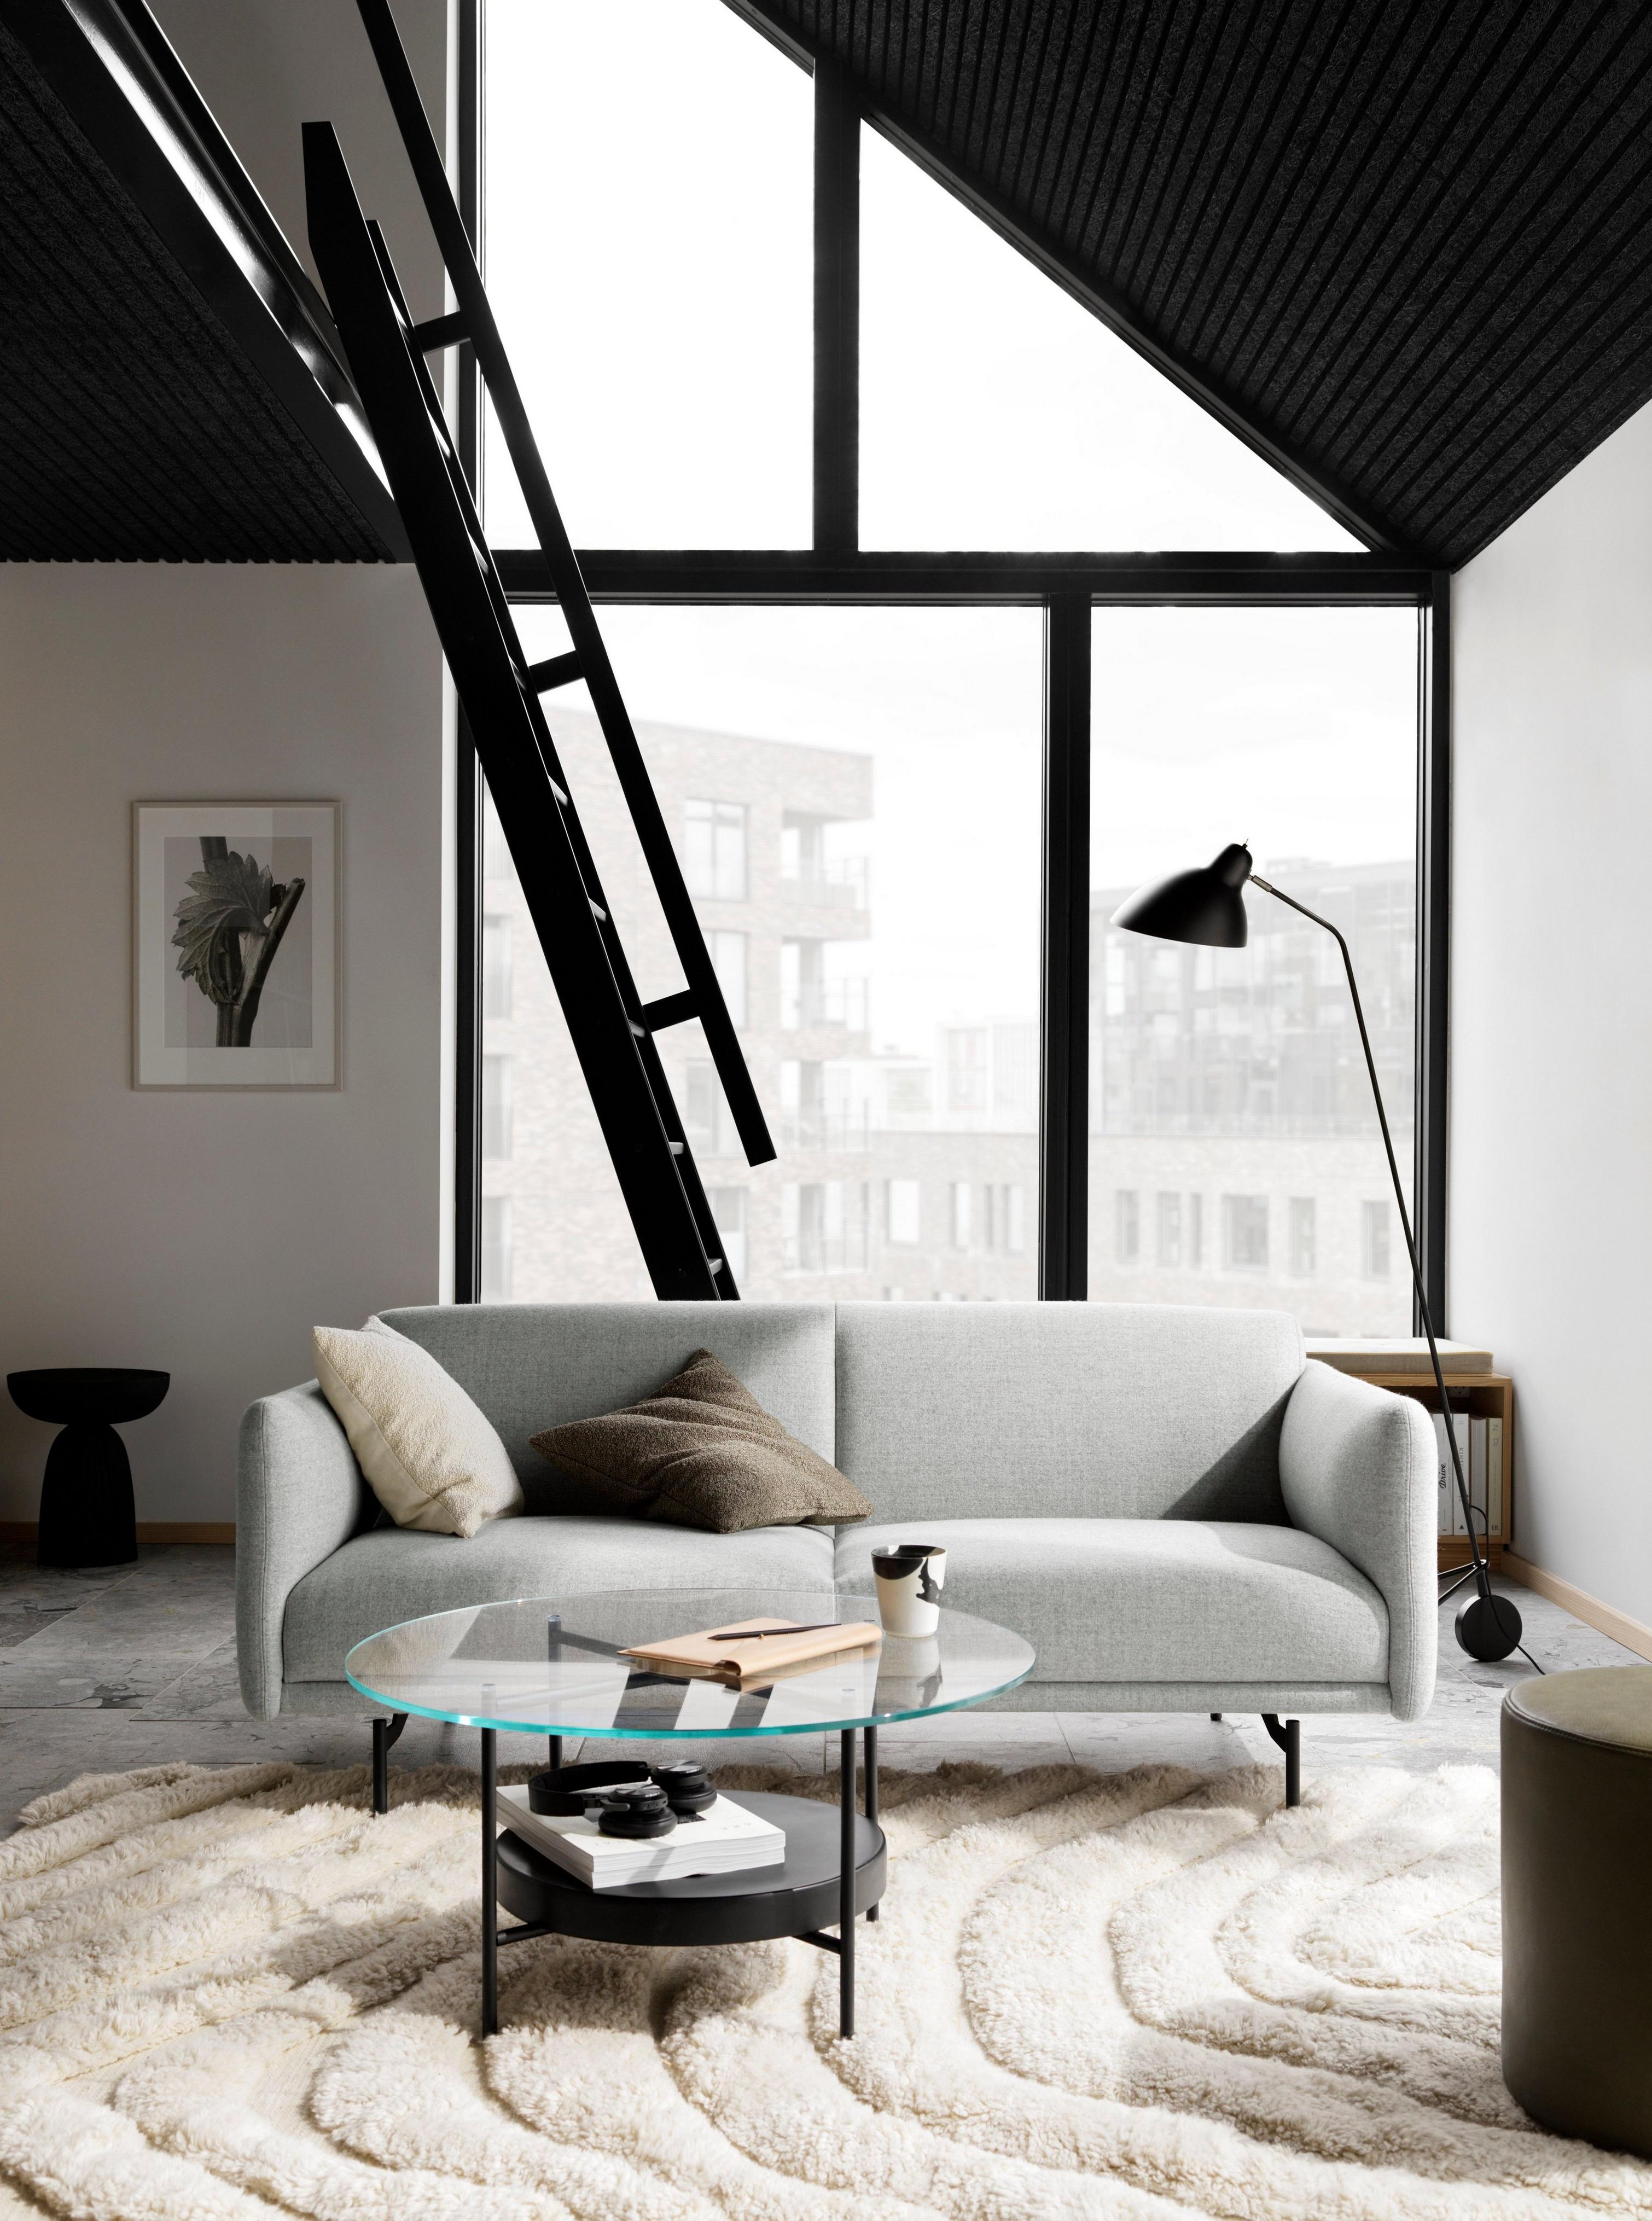 Loft living room with a Berne sofa, Madrid glass coffee table, shag rug, and floor-to-ceiling windows.